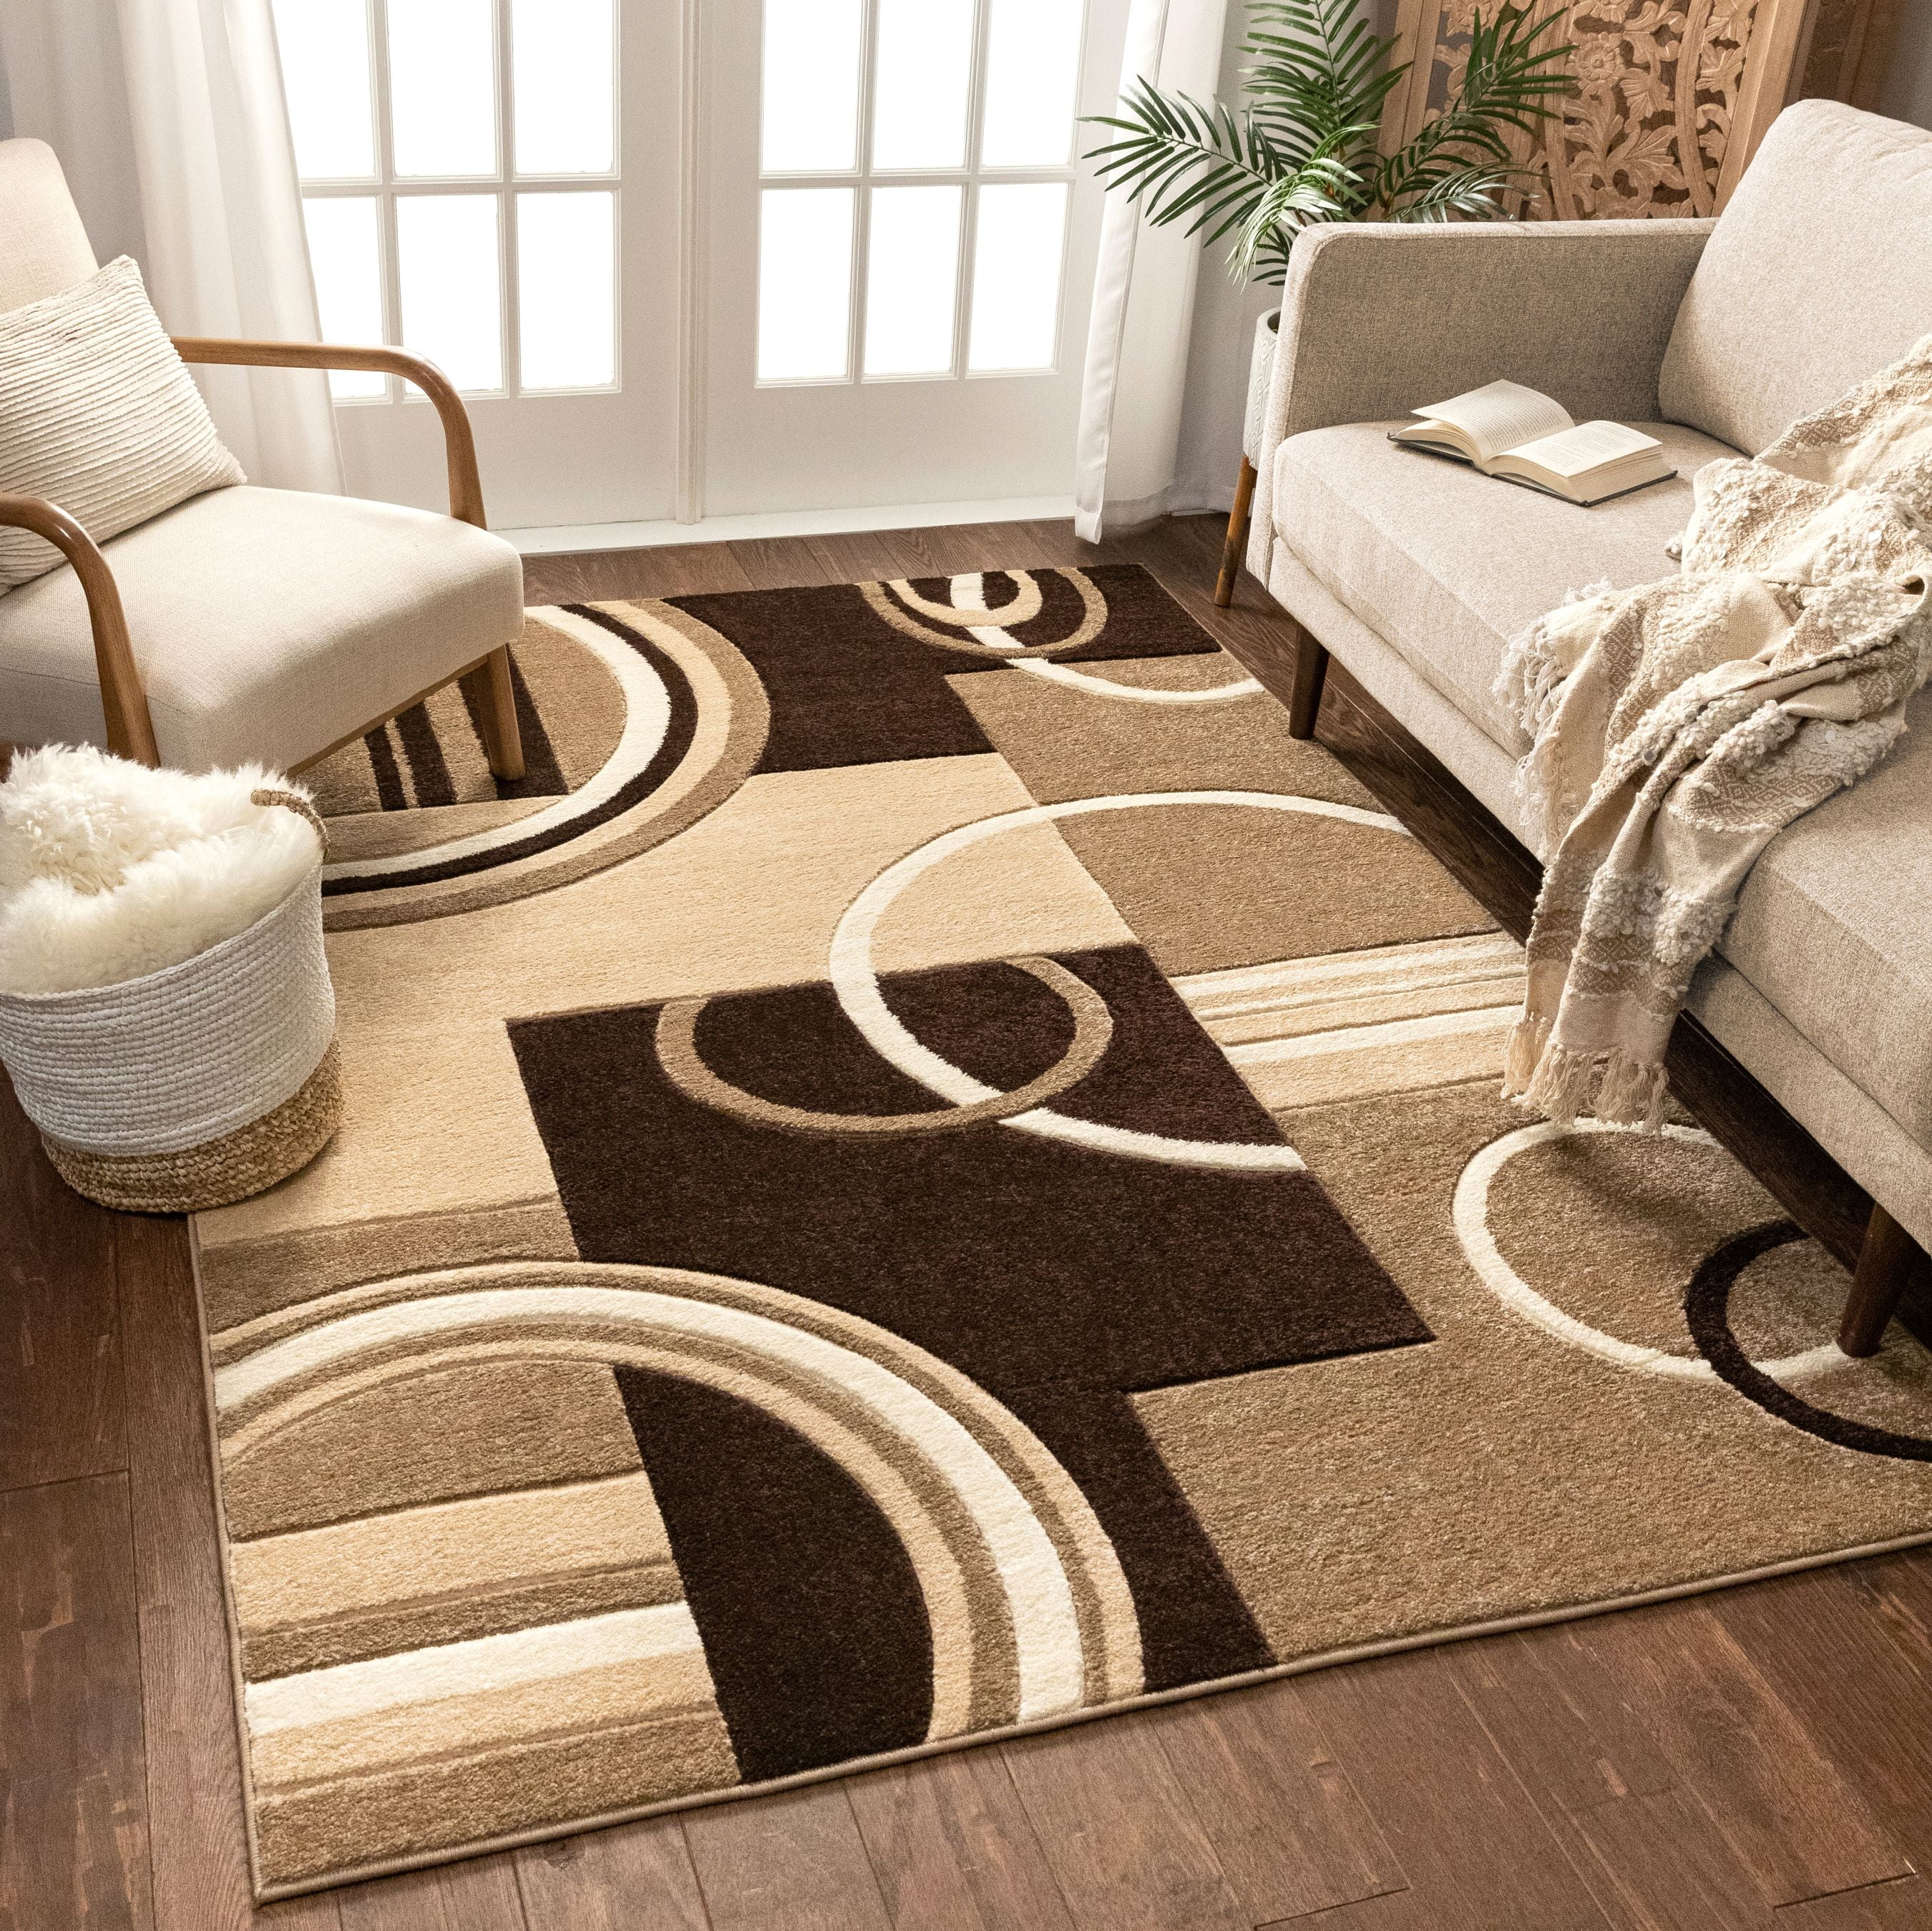 Better Bathrooms AMAZING exclusive ACRYLIC RUGS "VALS" circle geometric IVORY BEIGE Best Quality 